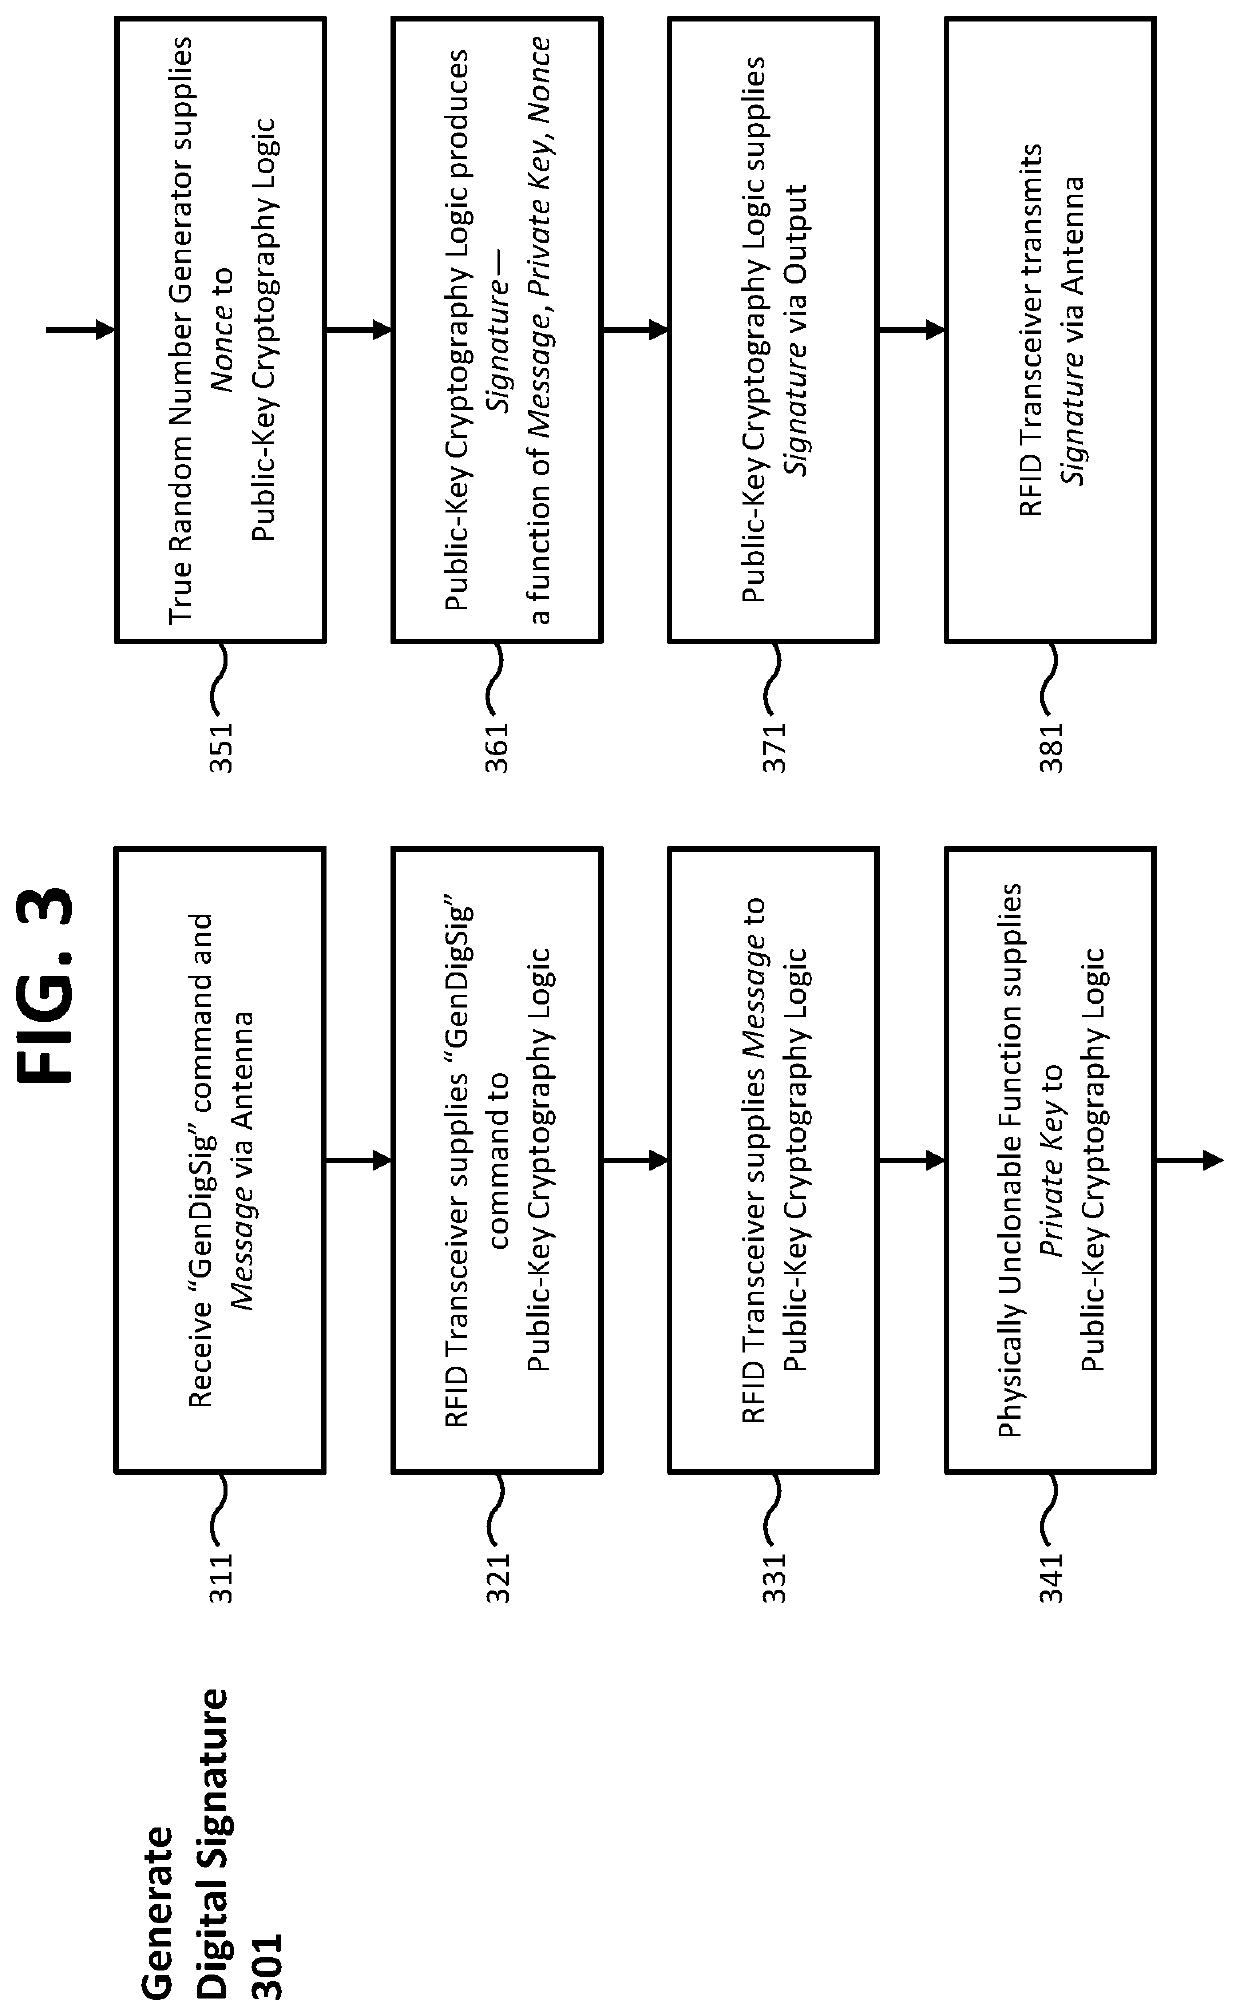 Devices, methods, and systems for cryptographic authentication and provenance of physical assets